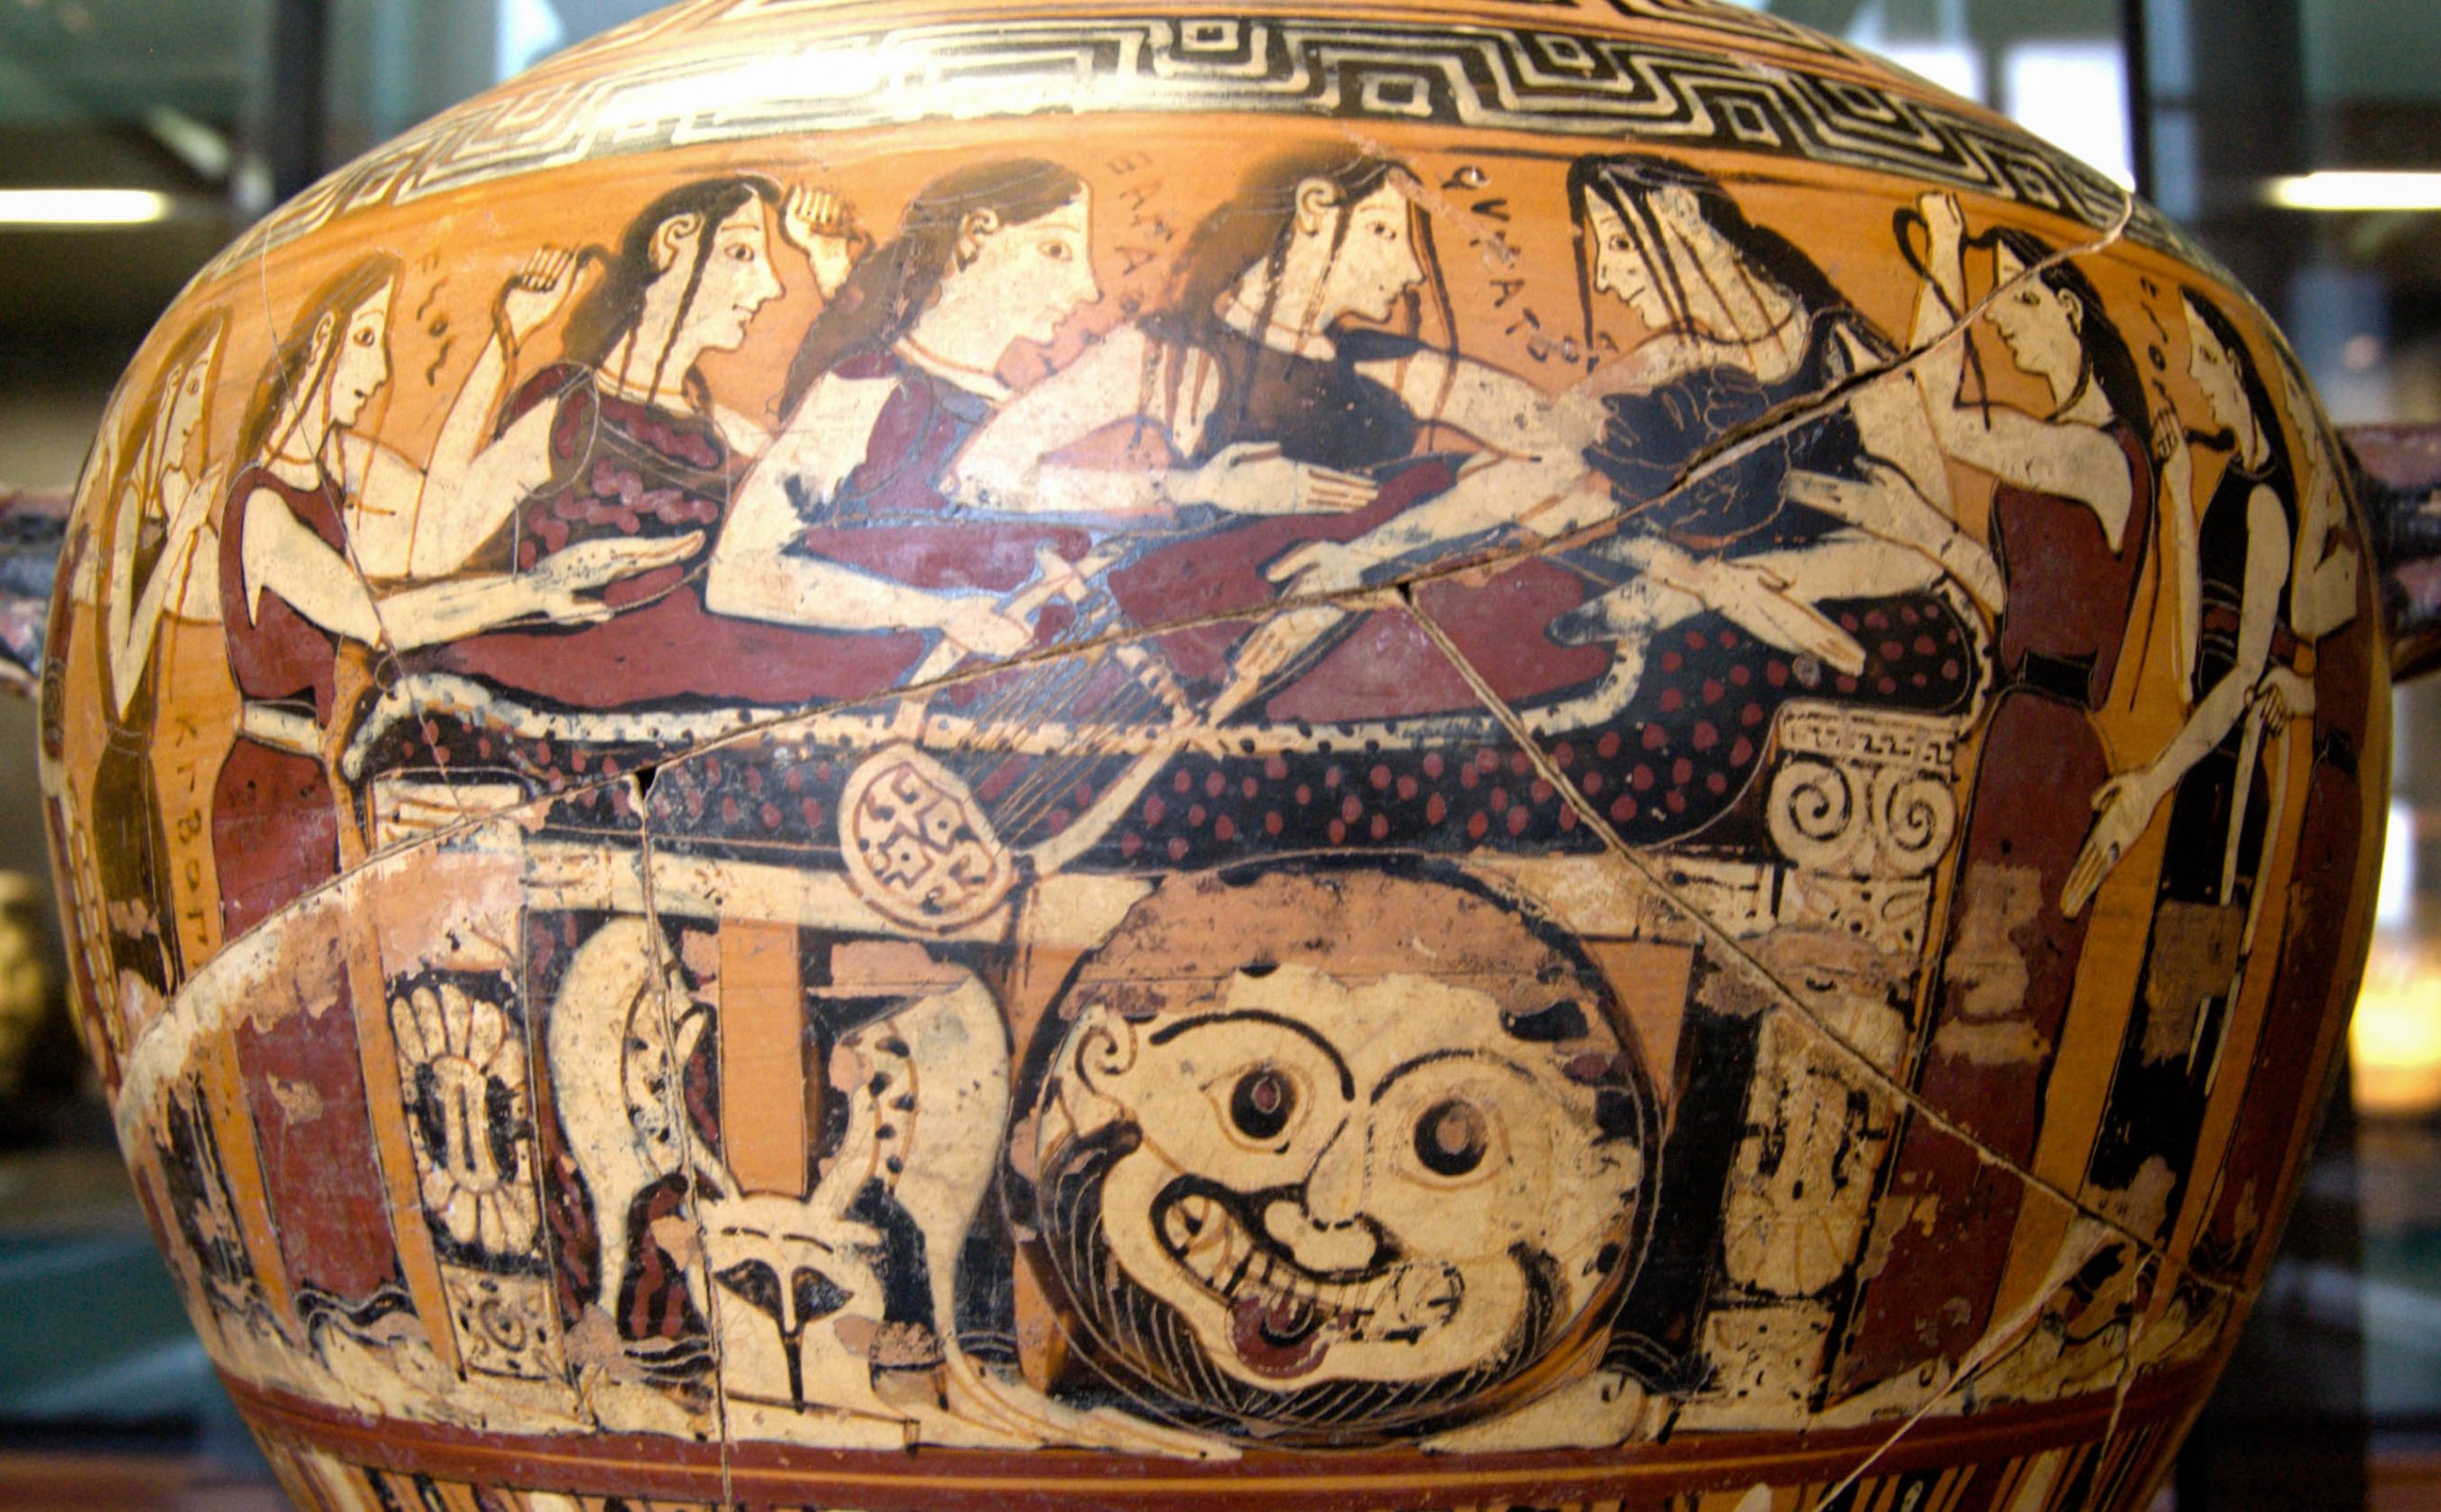 The body of Achilles, wrapped in a shroud, lies on a bench. Thesis, a woman with loose, messy hair, stands over him and clutches his body. A group of nereids, similar to Thetis in appearance, stand by, pulling their hair. A shield decorated with a Gorgoneion, along with a plumed helm, is propped up against the bench. Achilles is represented in black, while the women are painted in white.